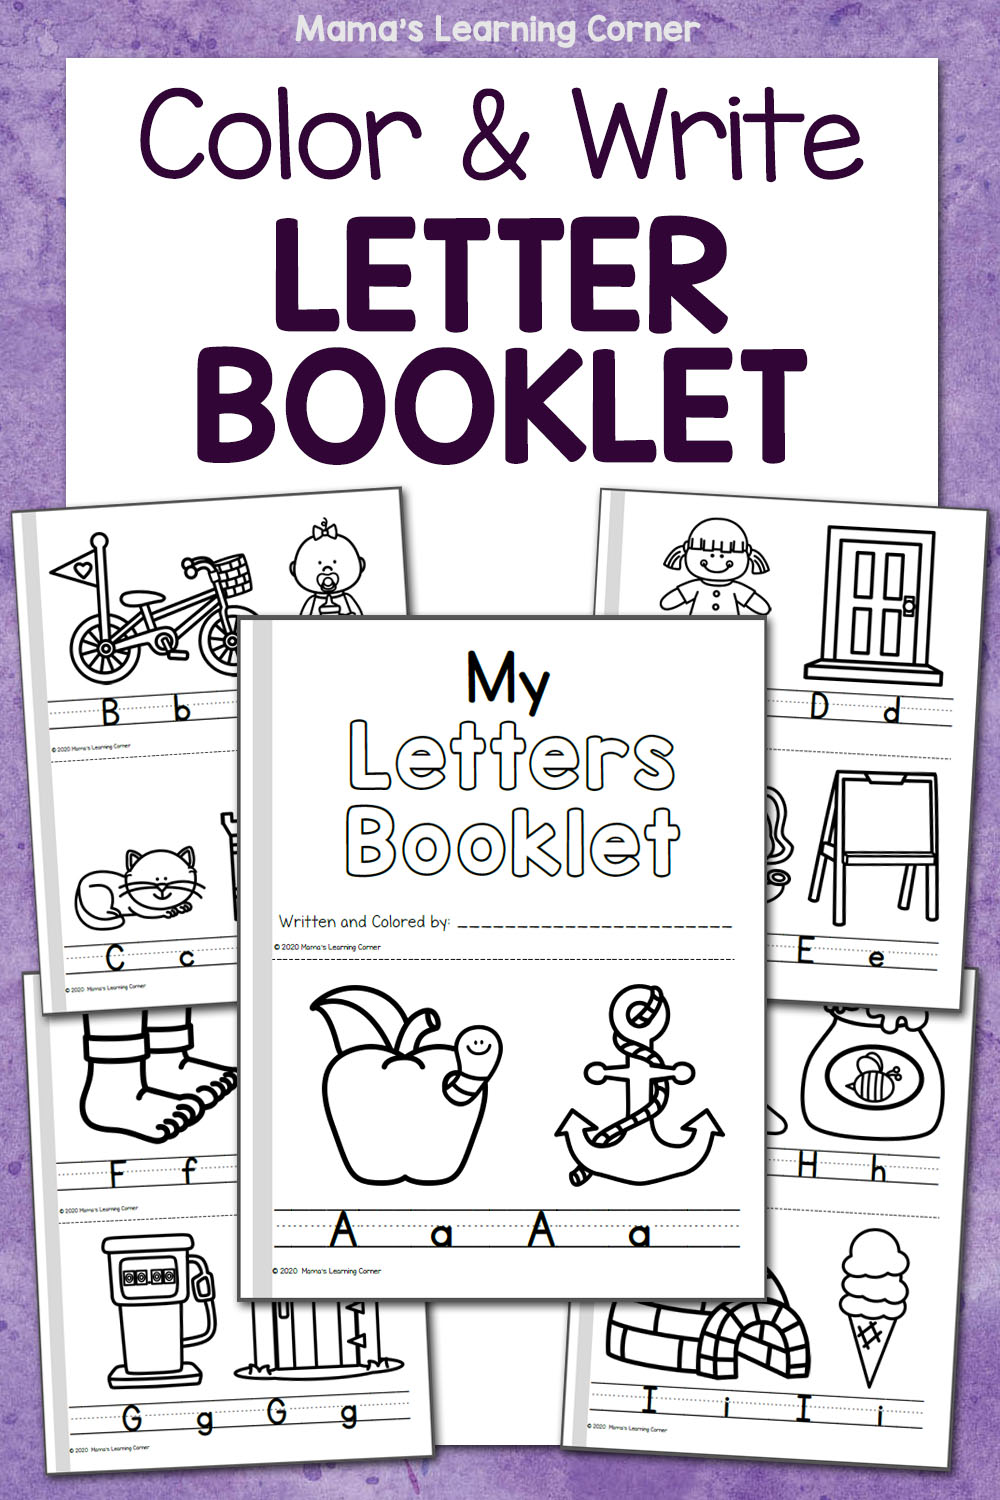 Color and Write Letter Booklet